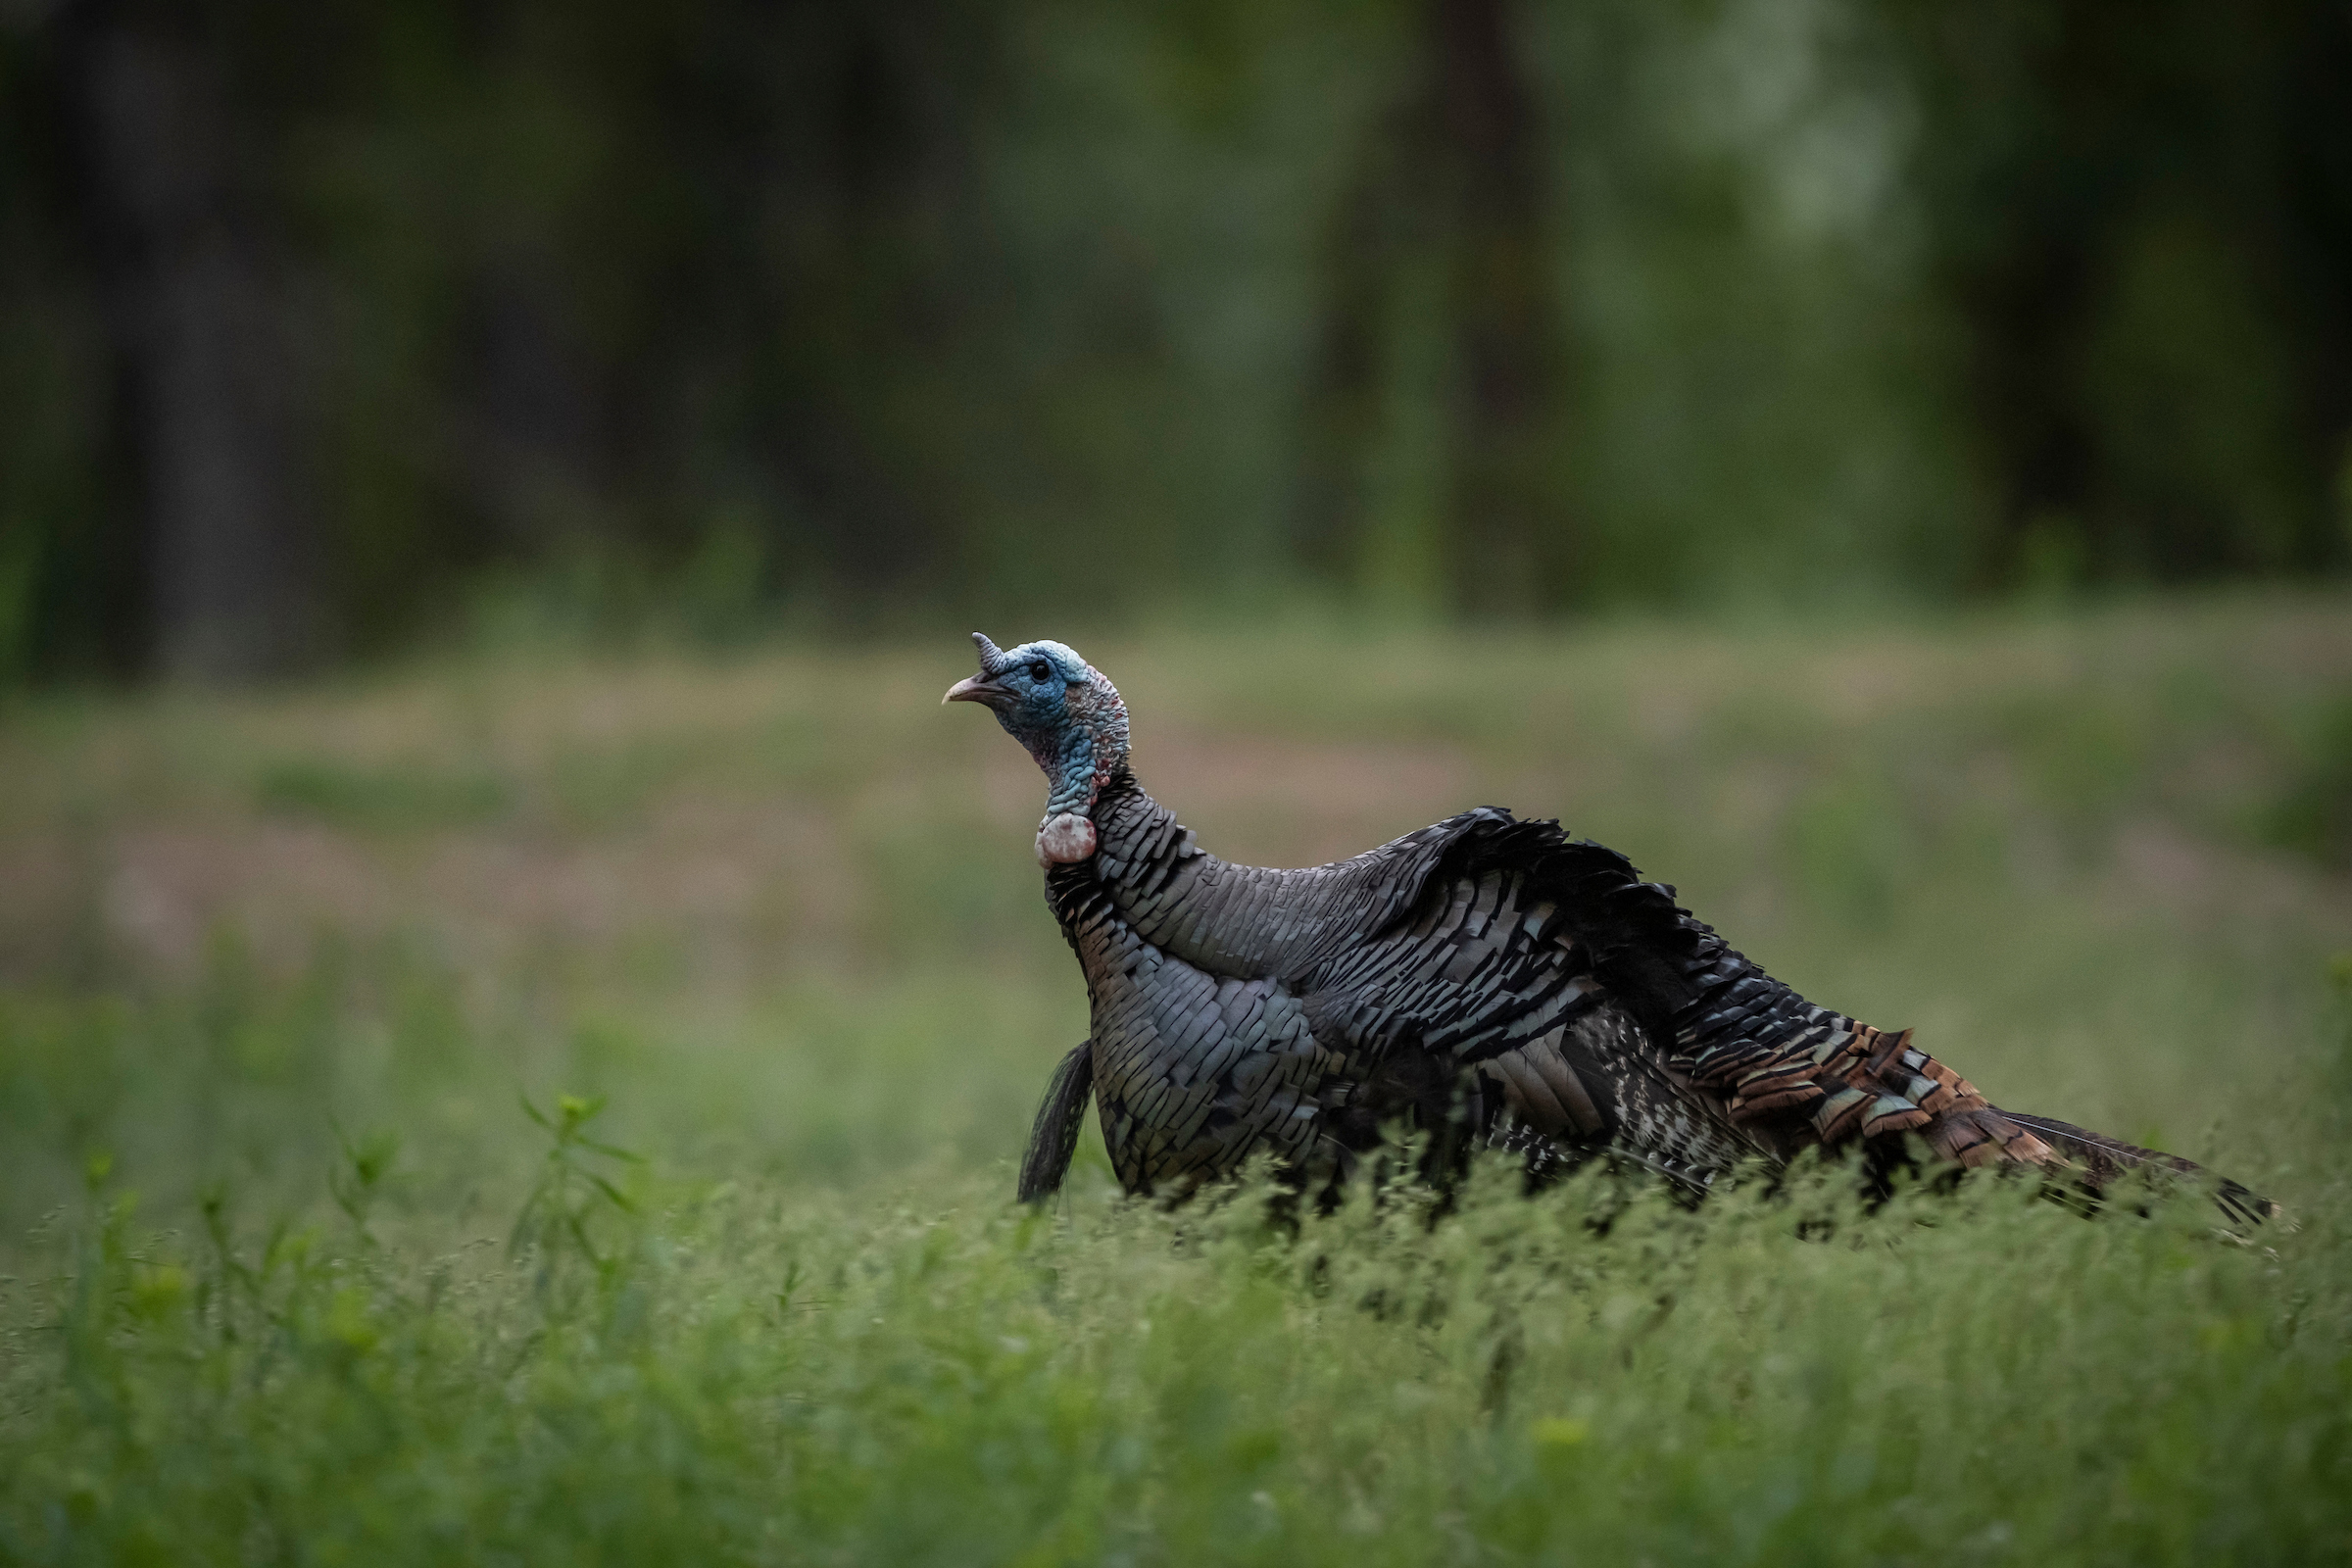 NWTF and Turkeys for Tomorrow both hope to address wild turkey population issues.